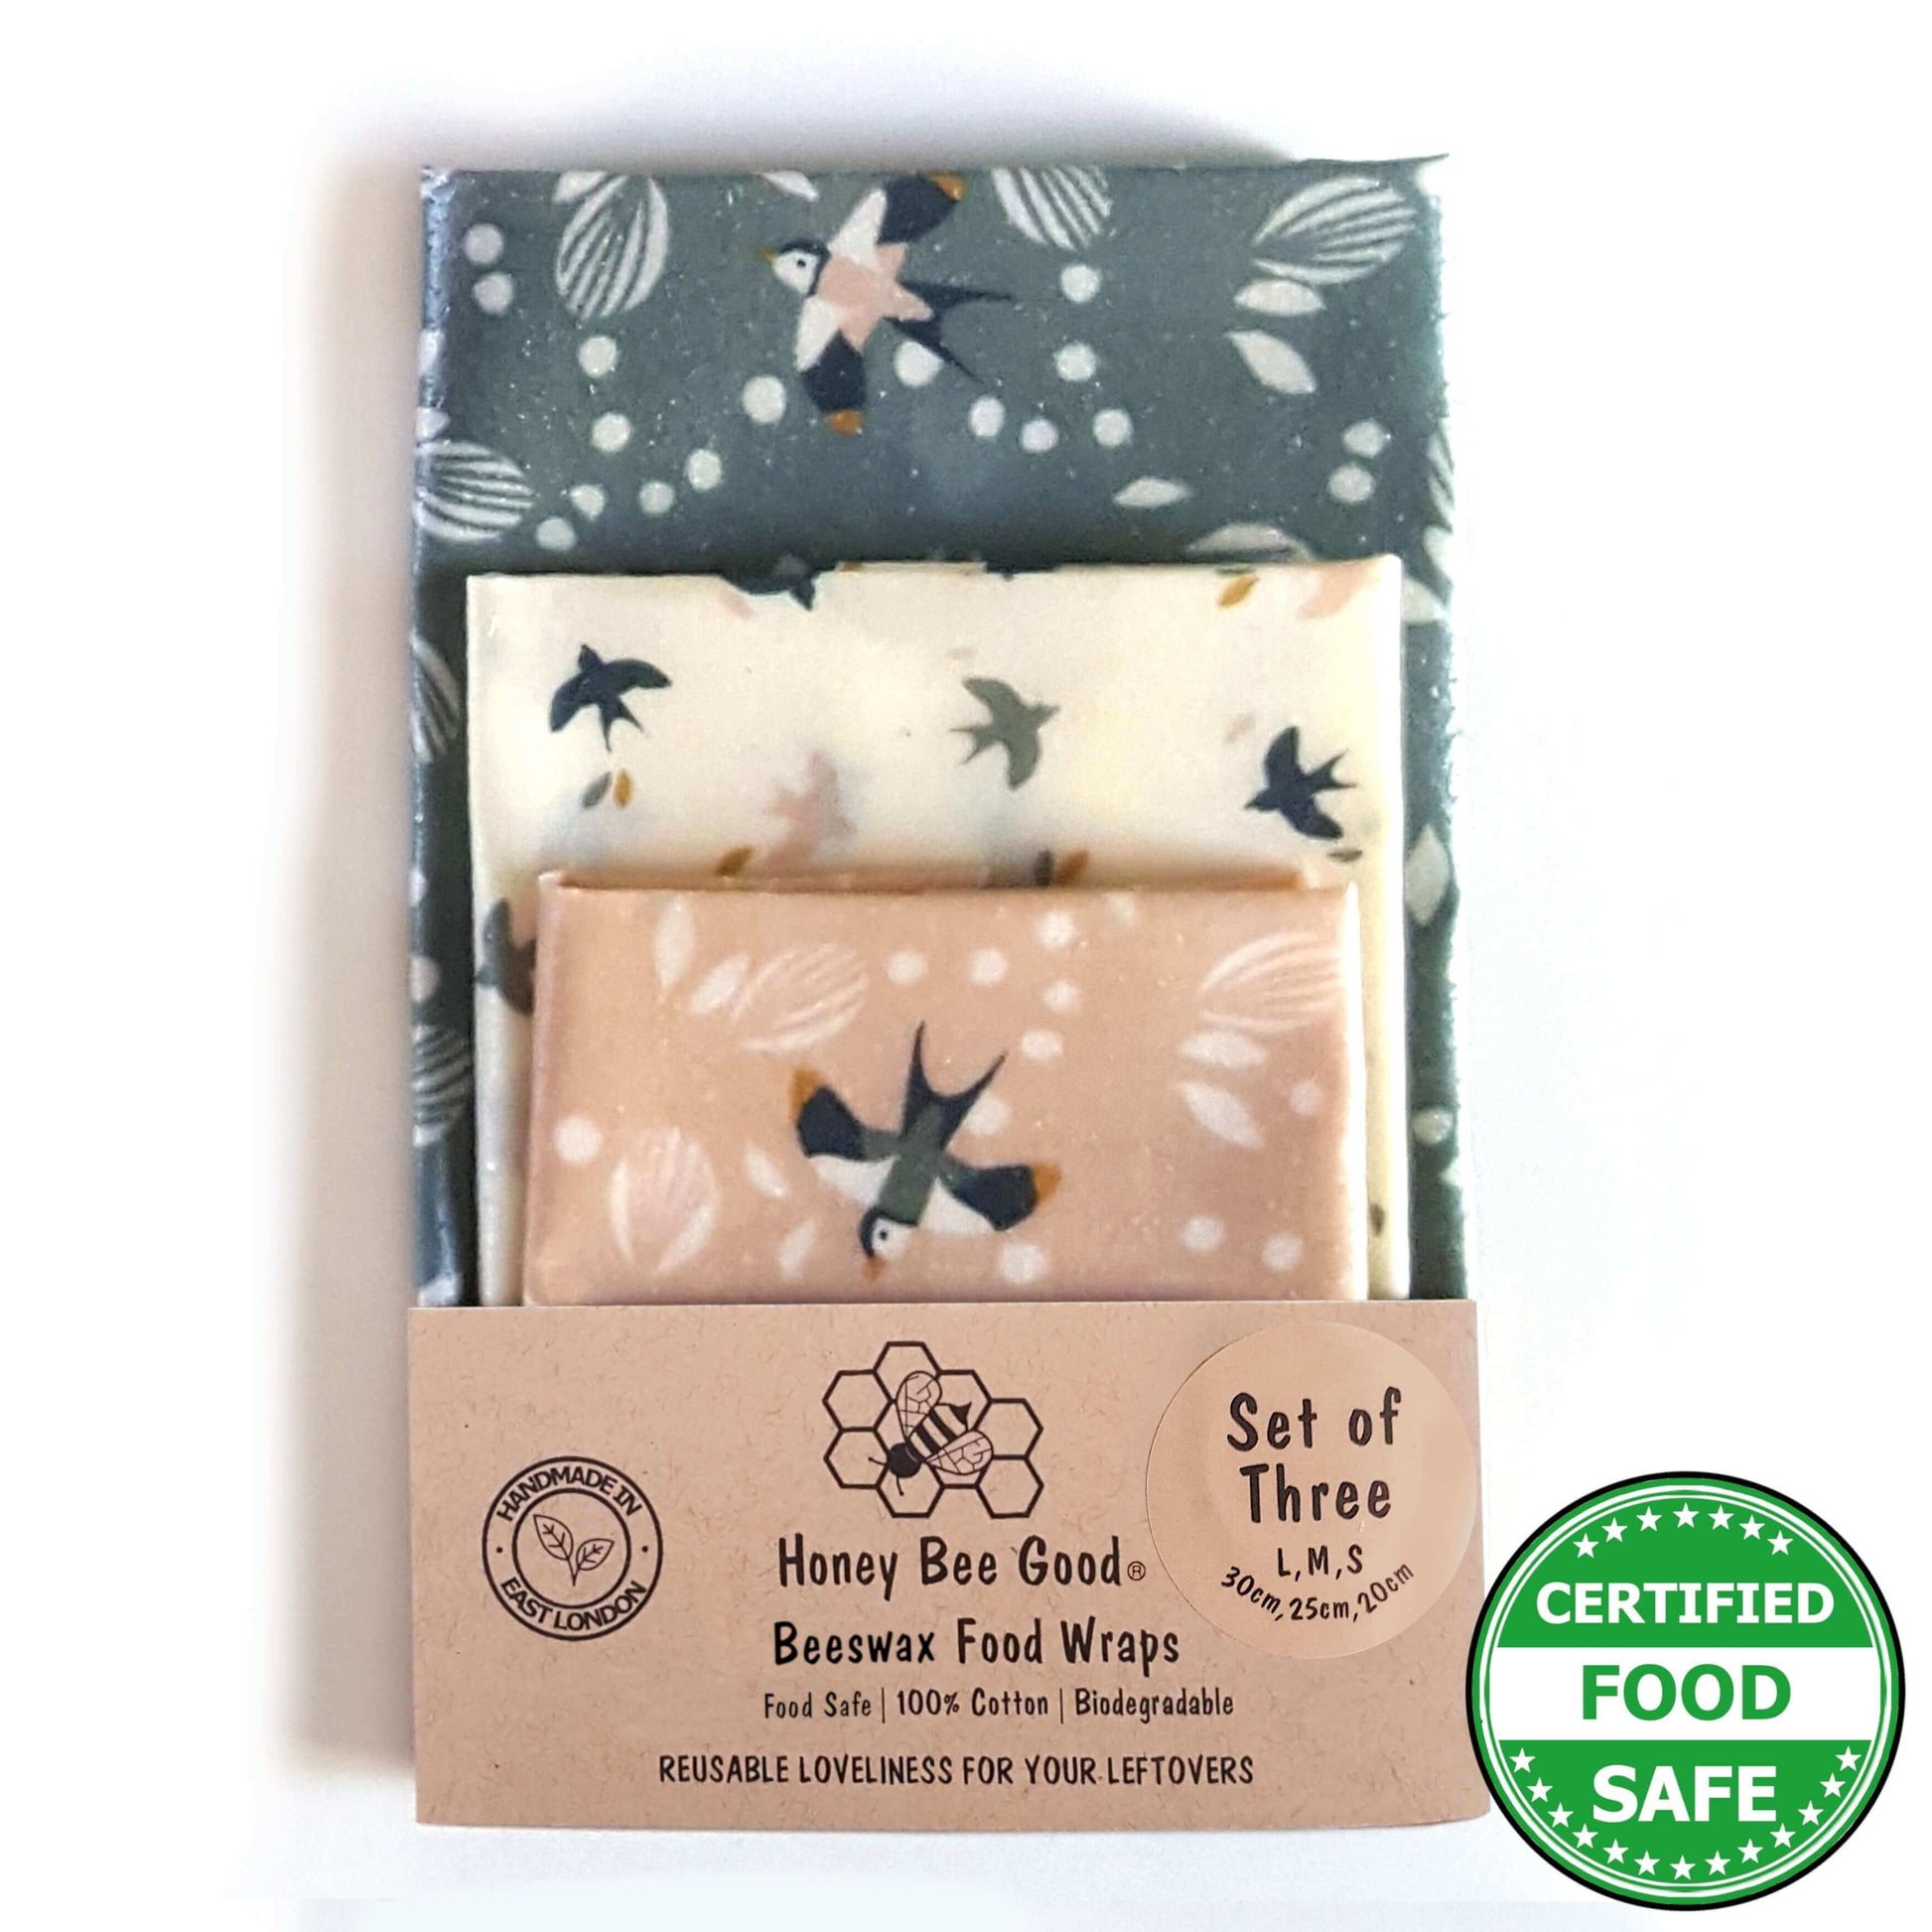 Reusable Beeswax Food Wraps 100% Hand Made in the UK by Honey Bee Good shown in Set of 3 Heritage Swifts pattern